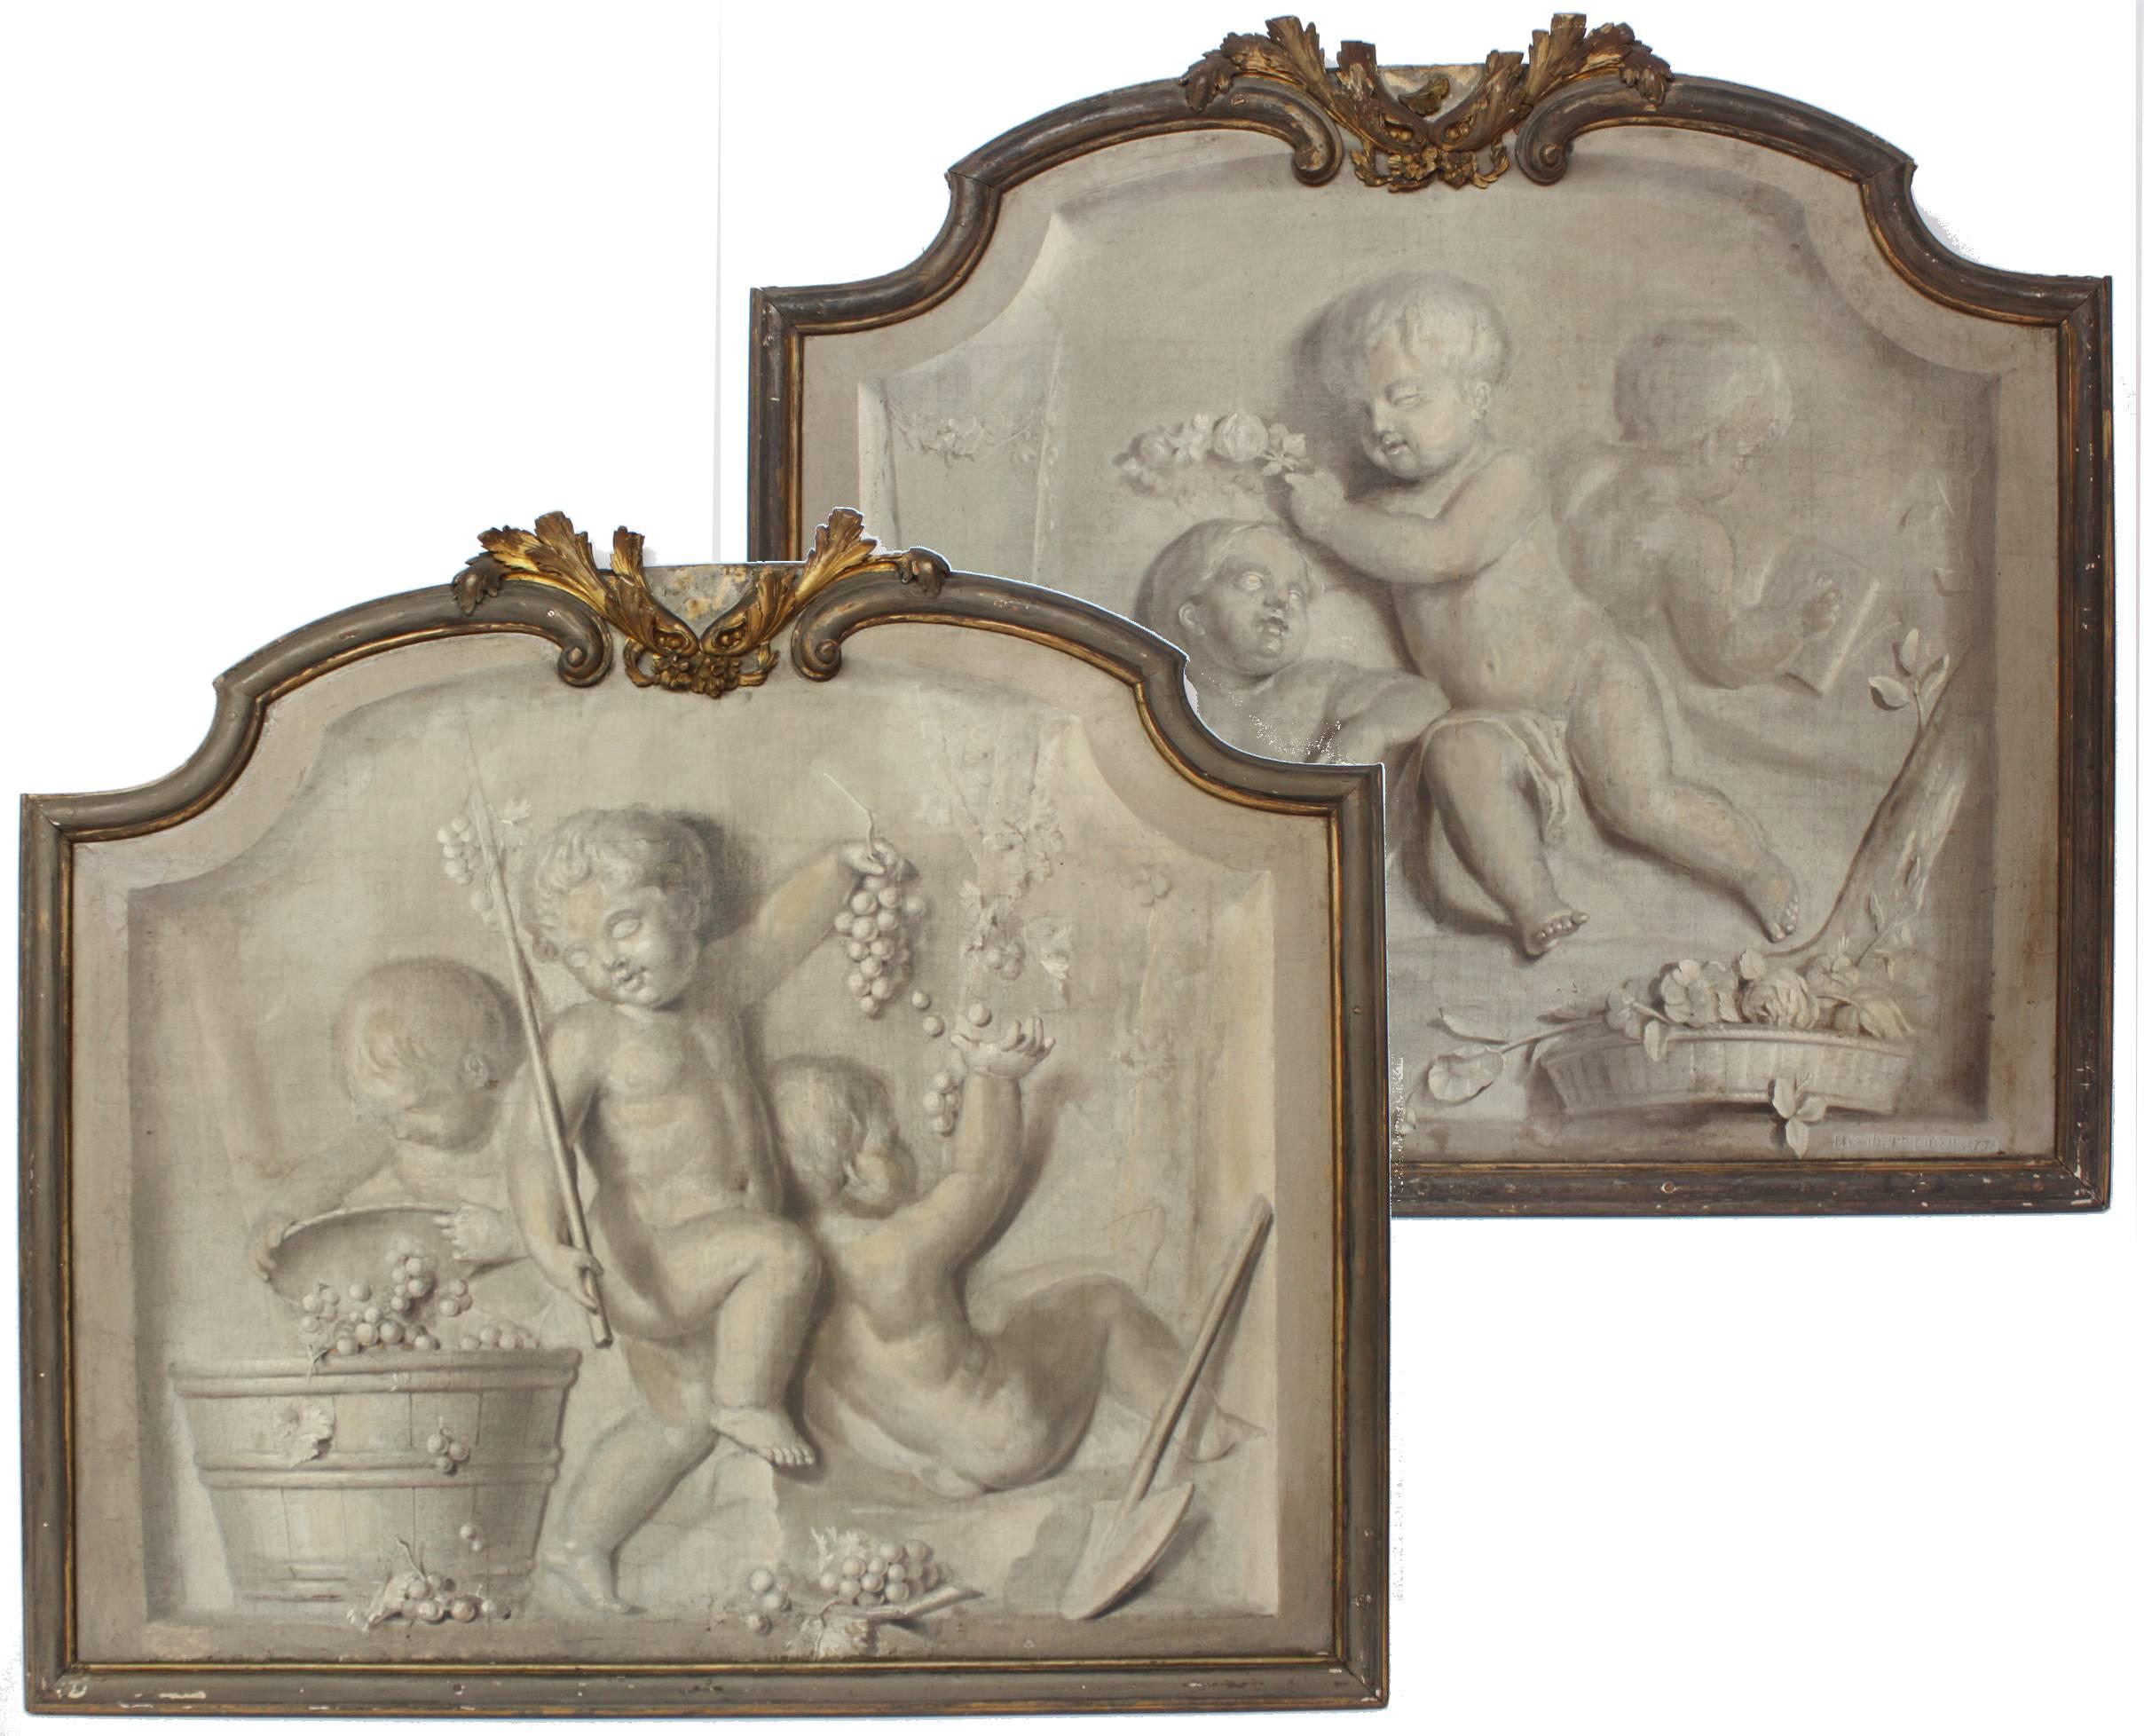 A pair of arched top Louis XVI style paintings on framed canvas panels, of groups of putti en grisaille trompe l'oeil, three putti each painting, one canvas with flowers (spring), the other canvas with grapes (Autumn), carved and gilded frame, as